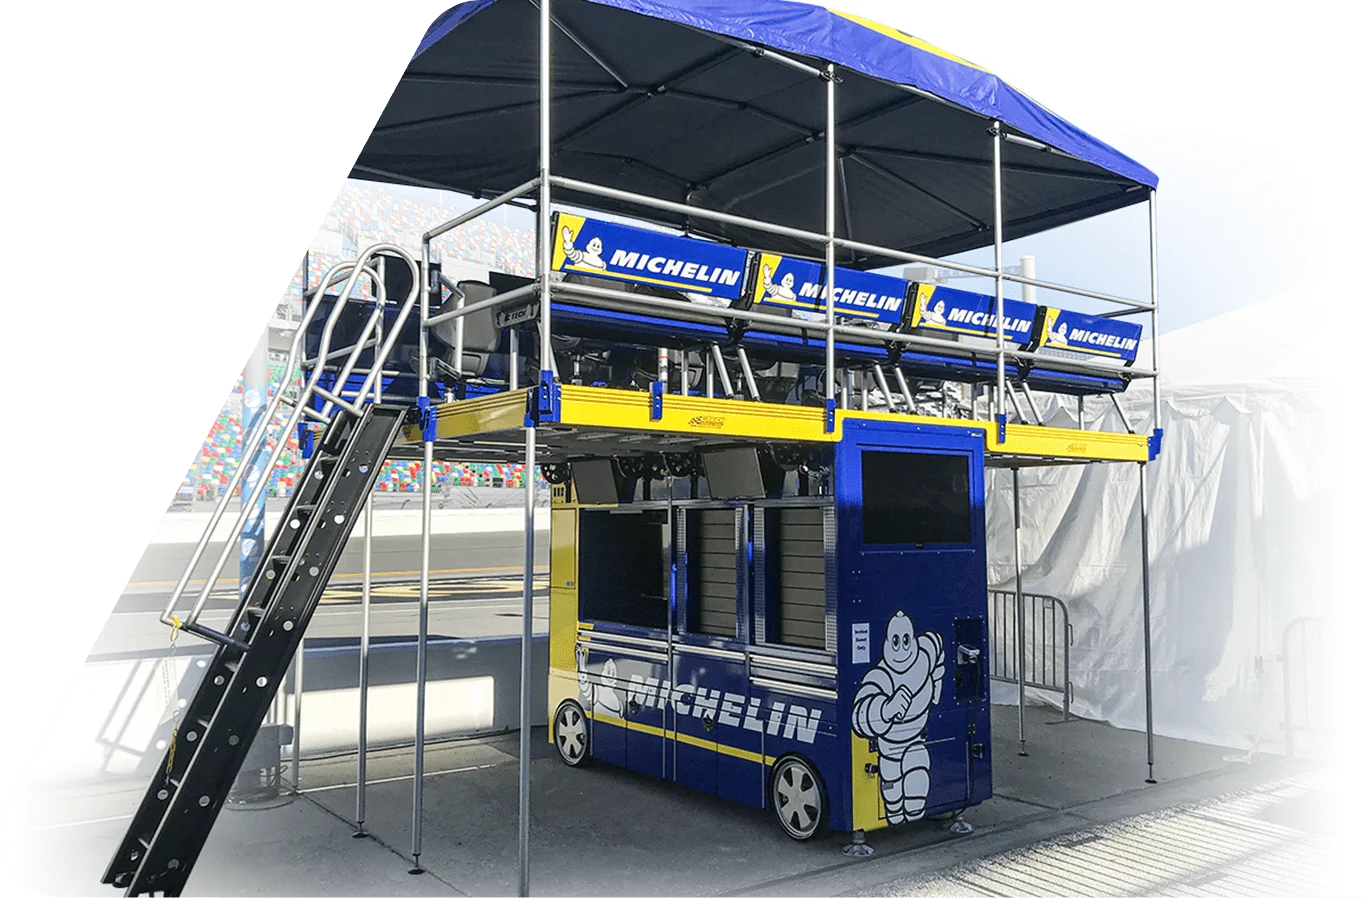 ULTRA Cart Dual Deck with Michelin Branding Deployed on Pit Lane